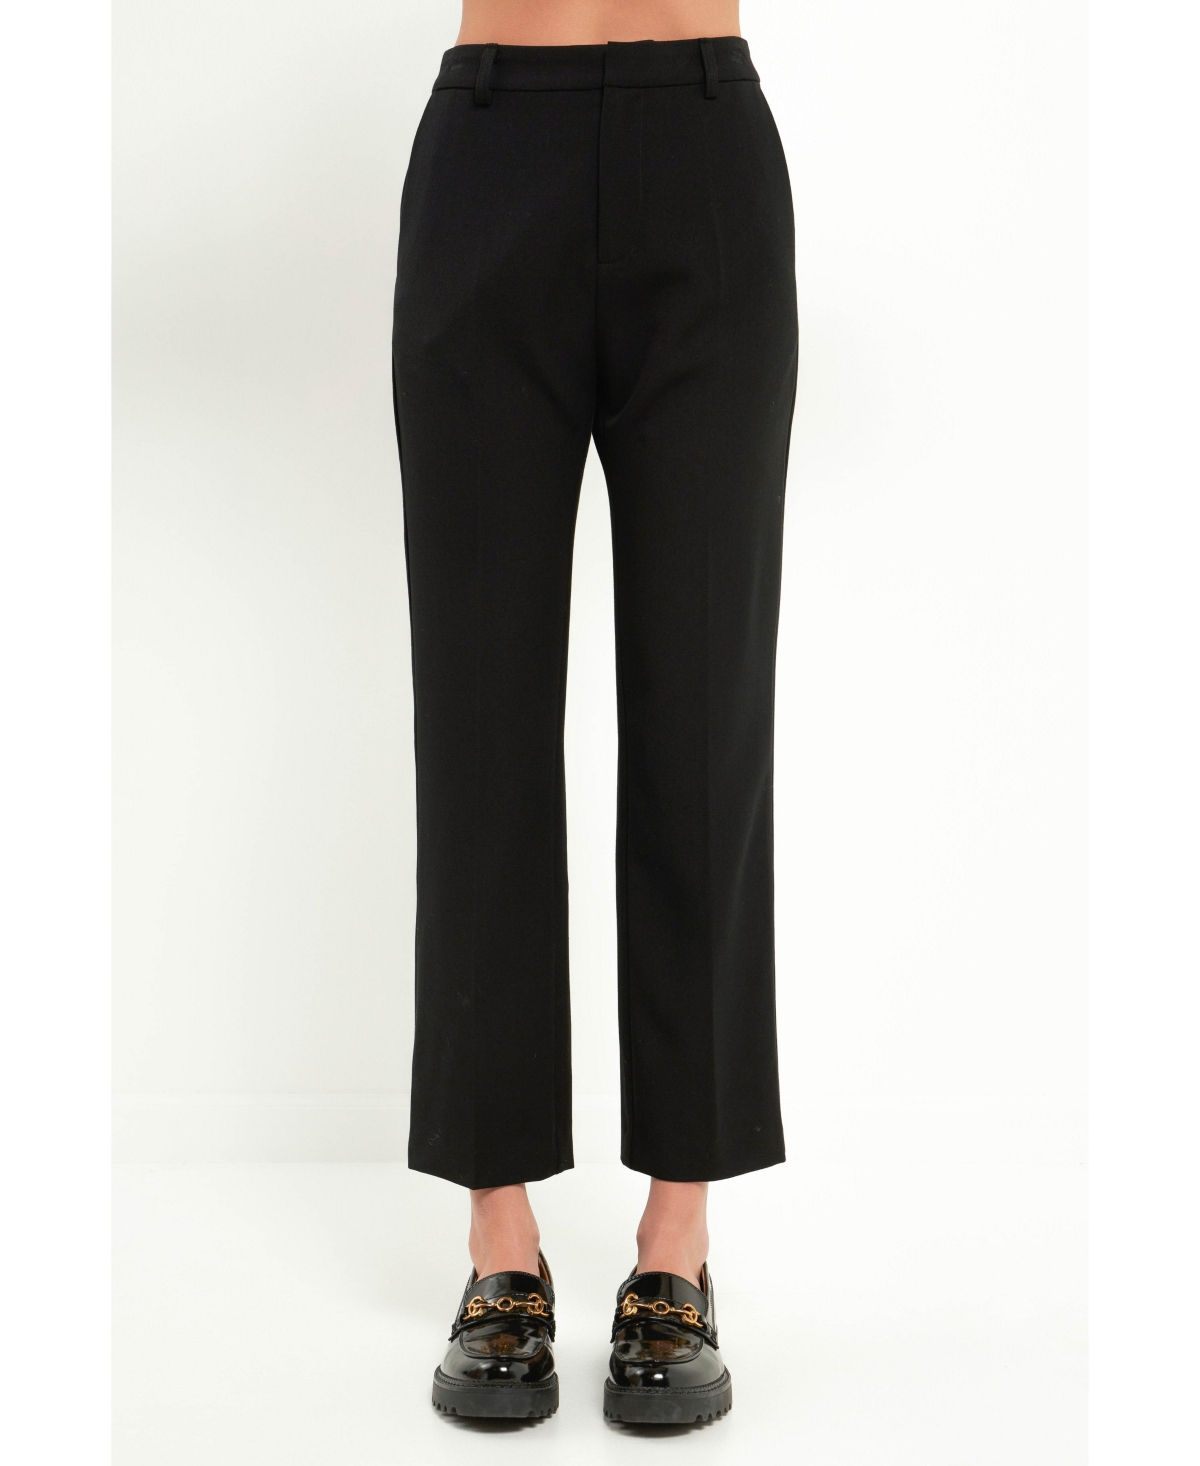 English Factory Women's Stretched Ankle Pants